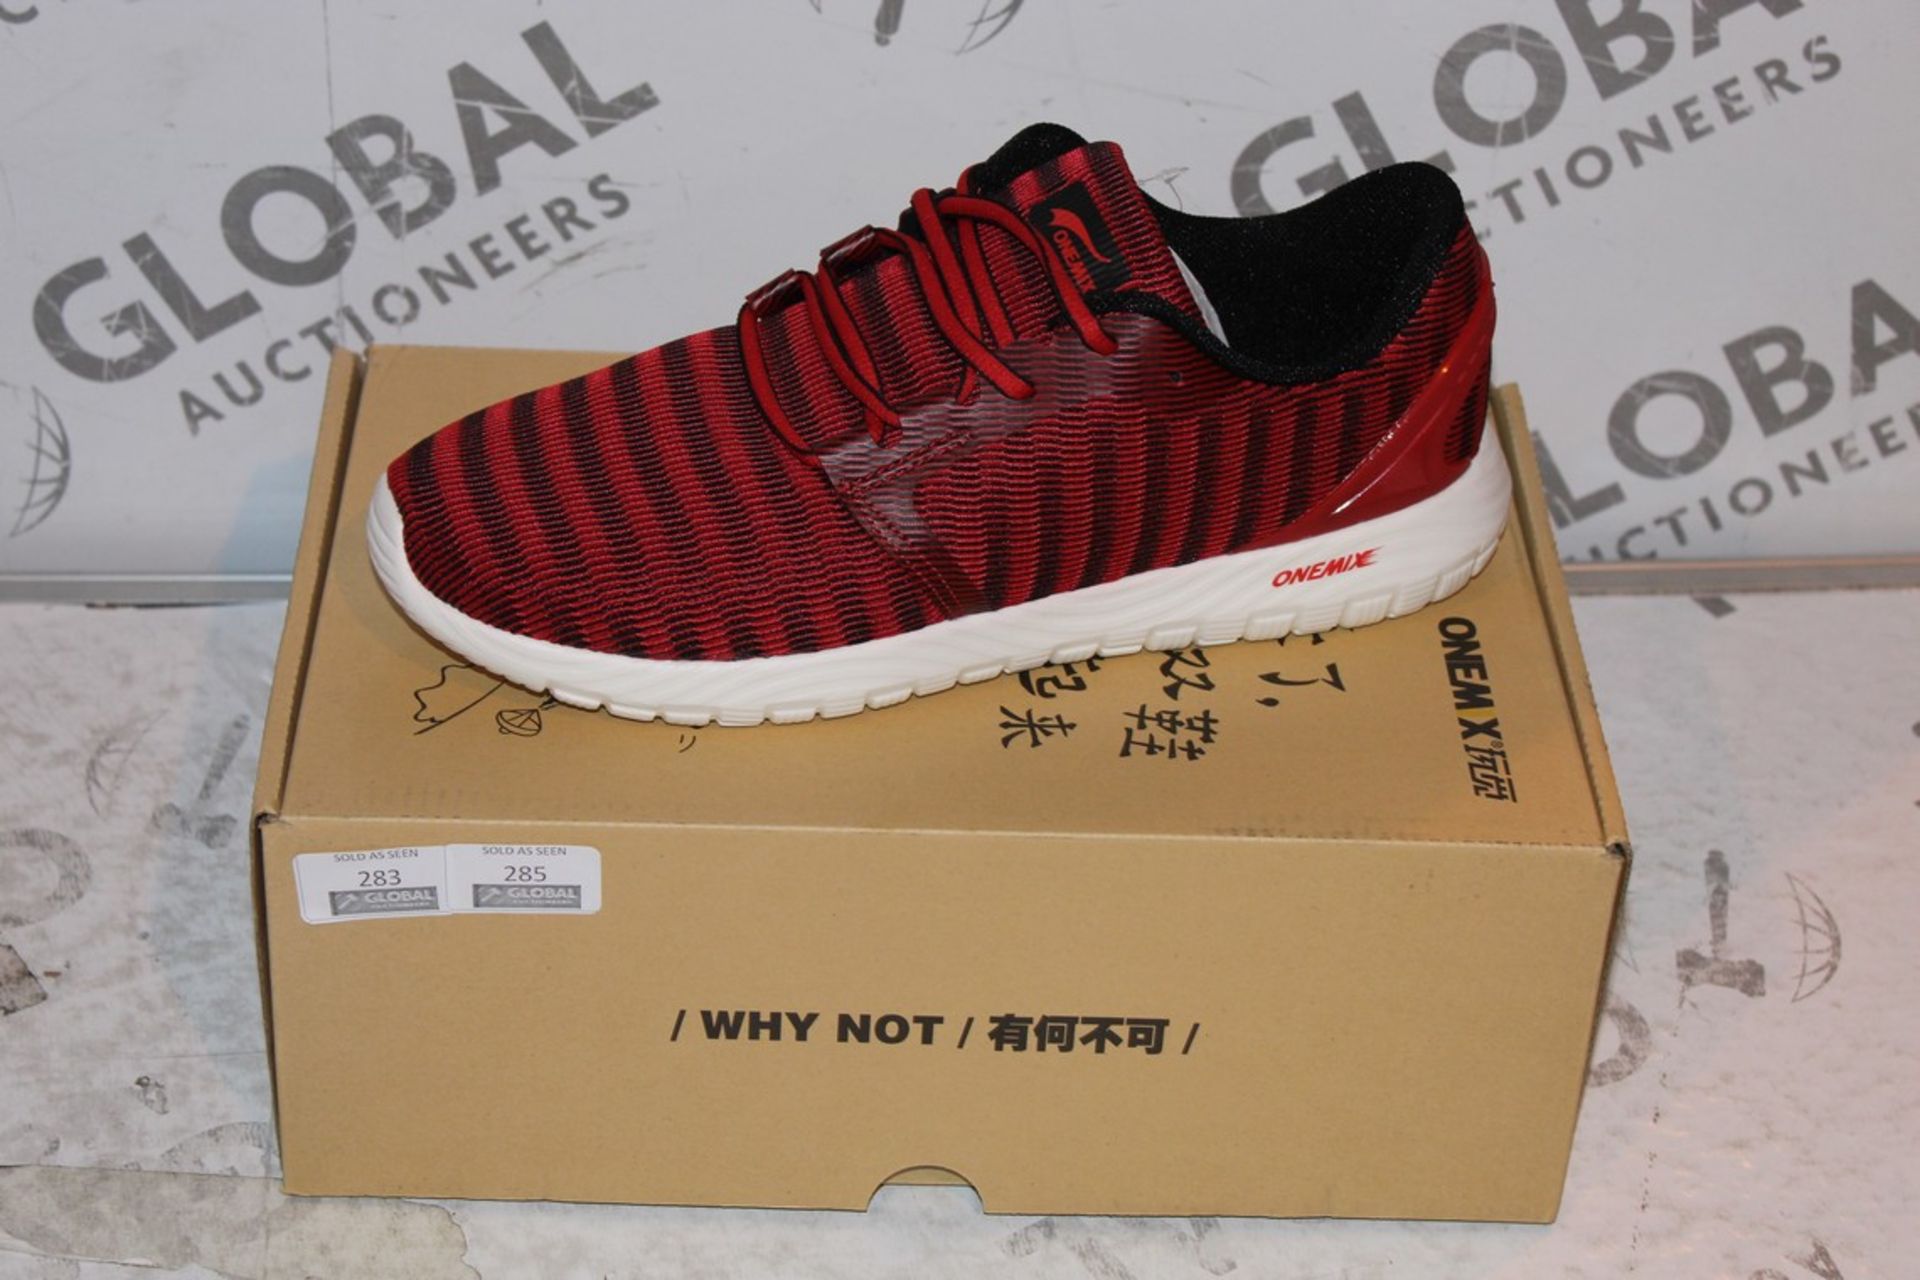 Boxed Brand New Pair of One Mix Size US10 EU44 Men's Red Trainers RRP £44.99